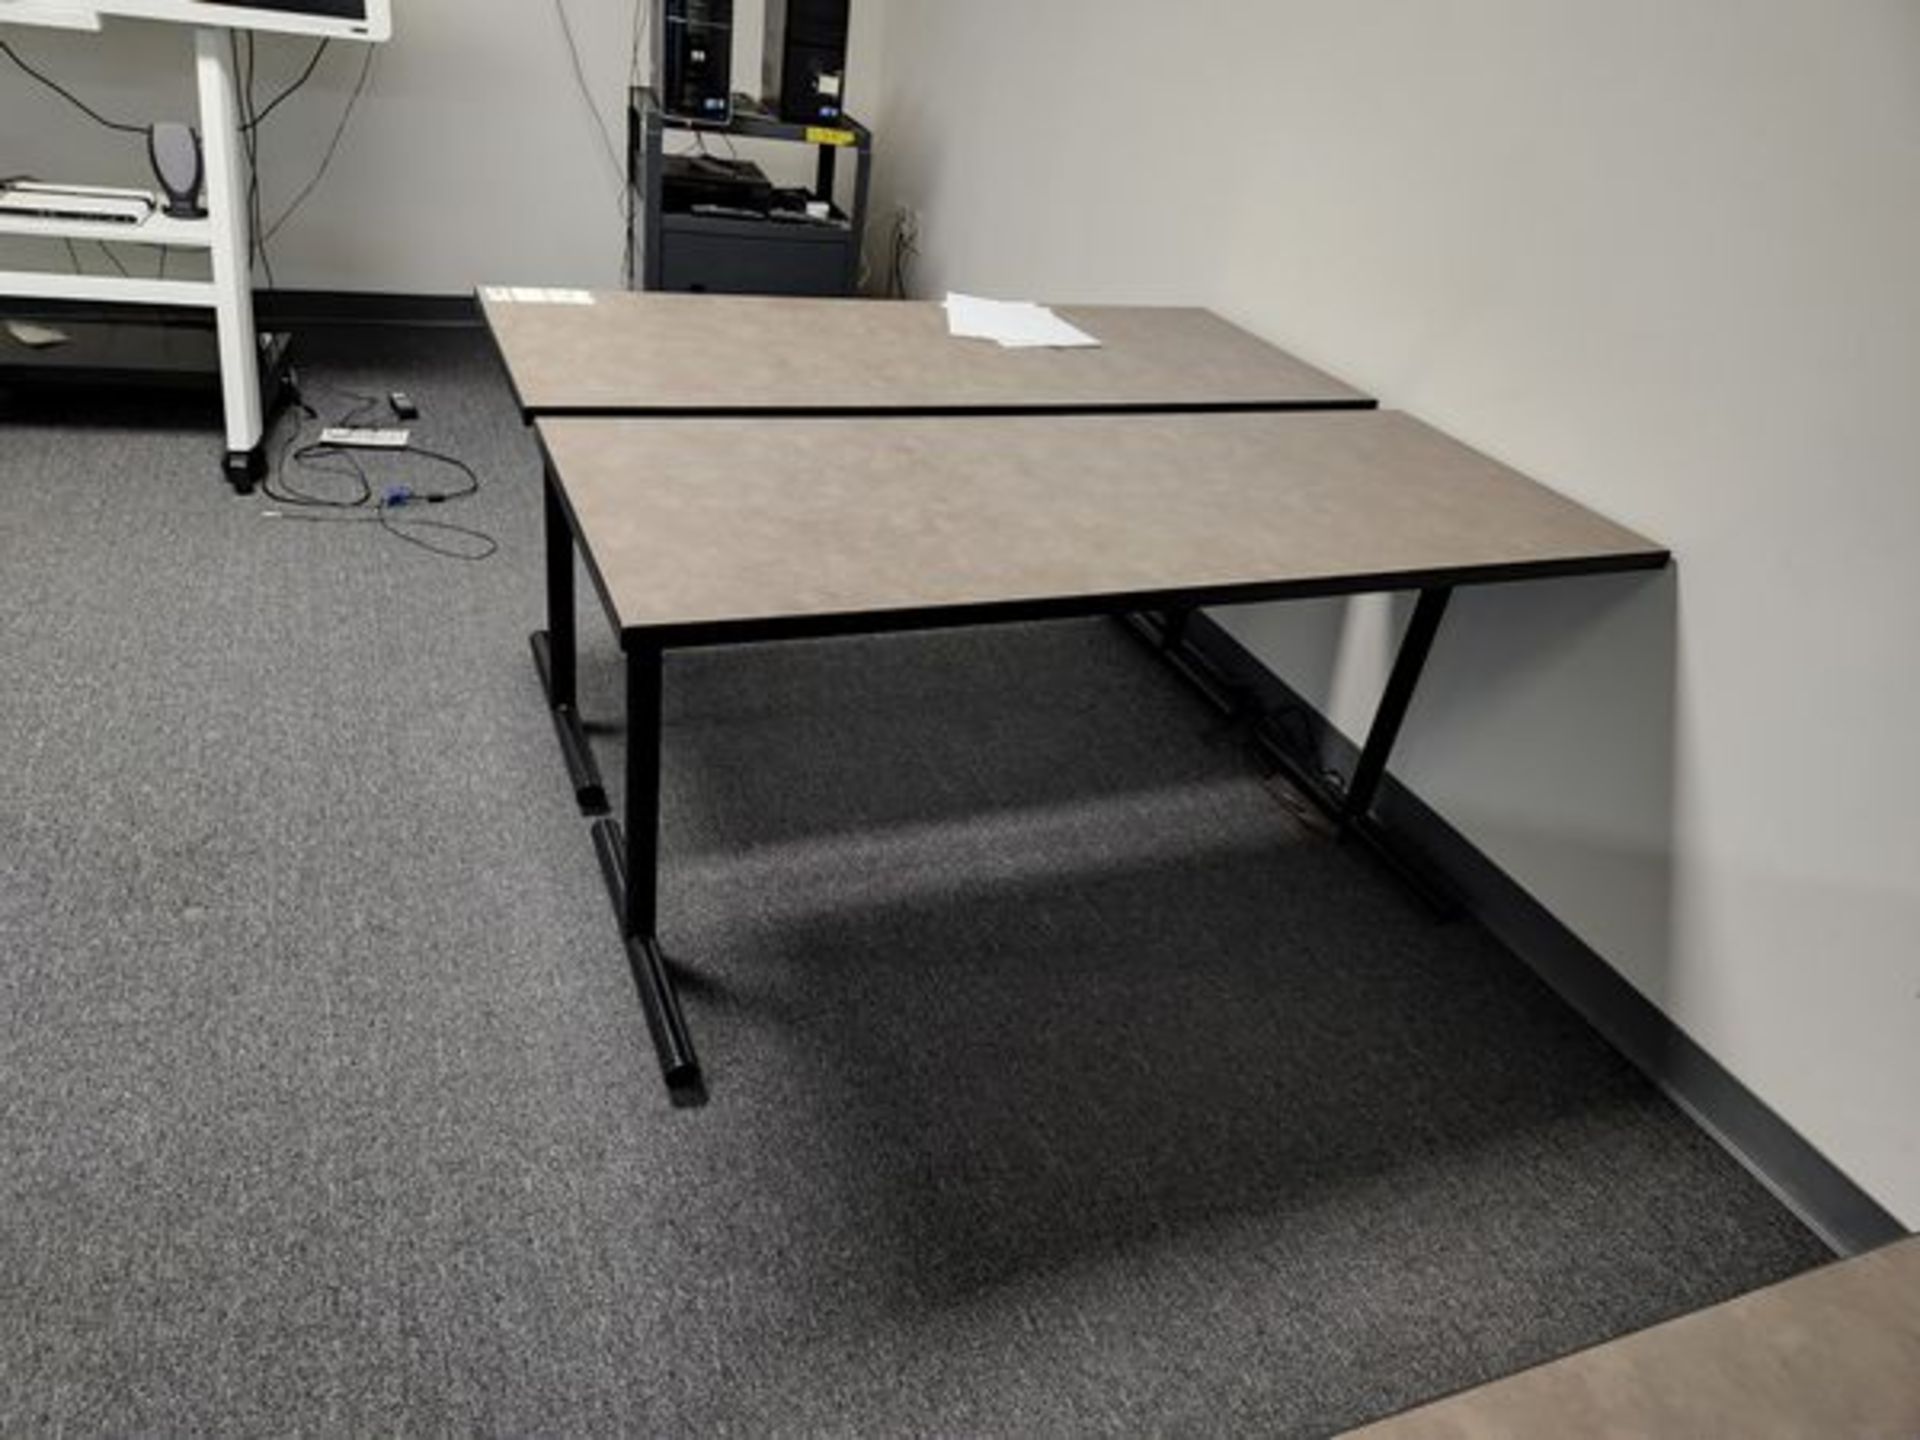 SET OF 2 TABLES 5' X 2' - Image 2 of 2